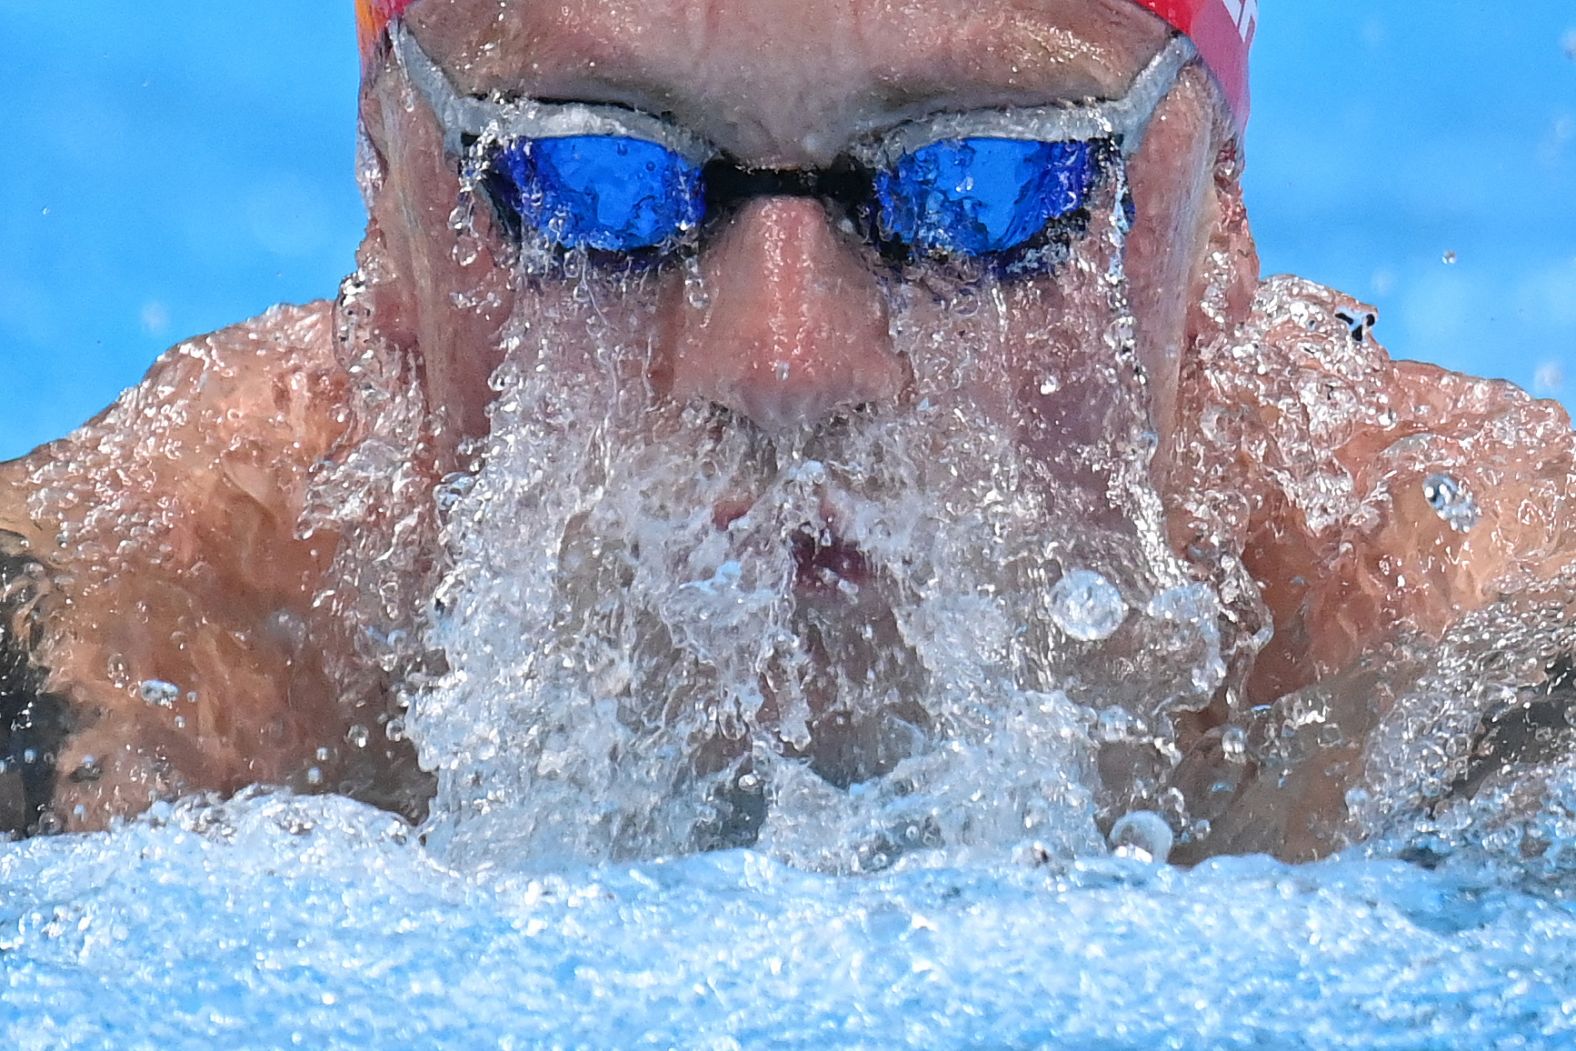 Great Britain's Adam Peaty competes in a semifinal of the 100-meter breaststroke on July 25. Peaty, the world-record holder in the event, <a href="https://www.cnn.com/world/live-news/tokyo-2020-olympics-07-25-21-spt/h_b65390879a4243d82bb18001152511c3" target="_blank">went on to win gold in the final.</a> He also won the event at the 2016 Olympics.